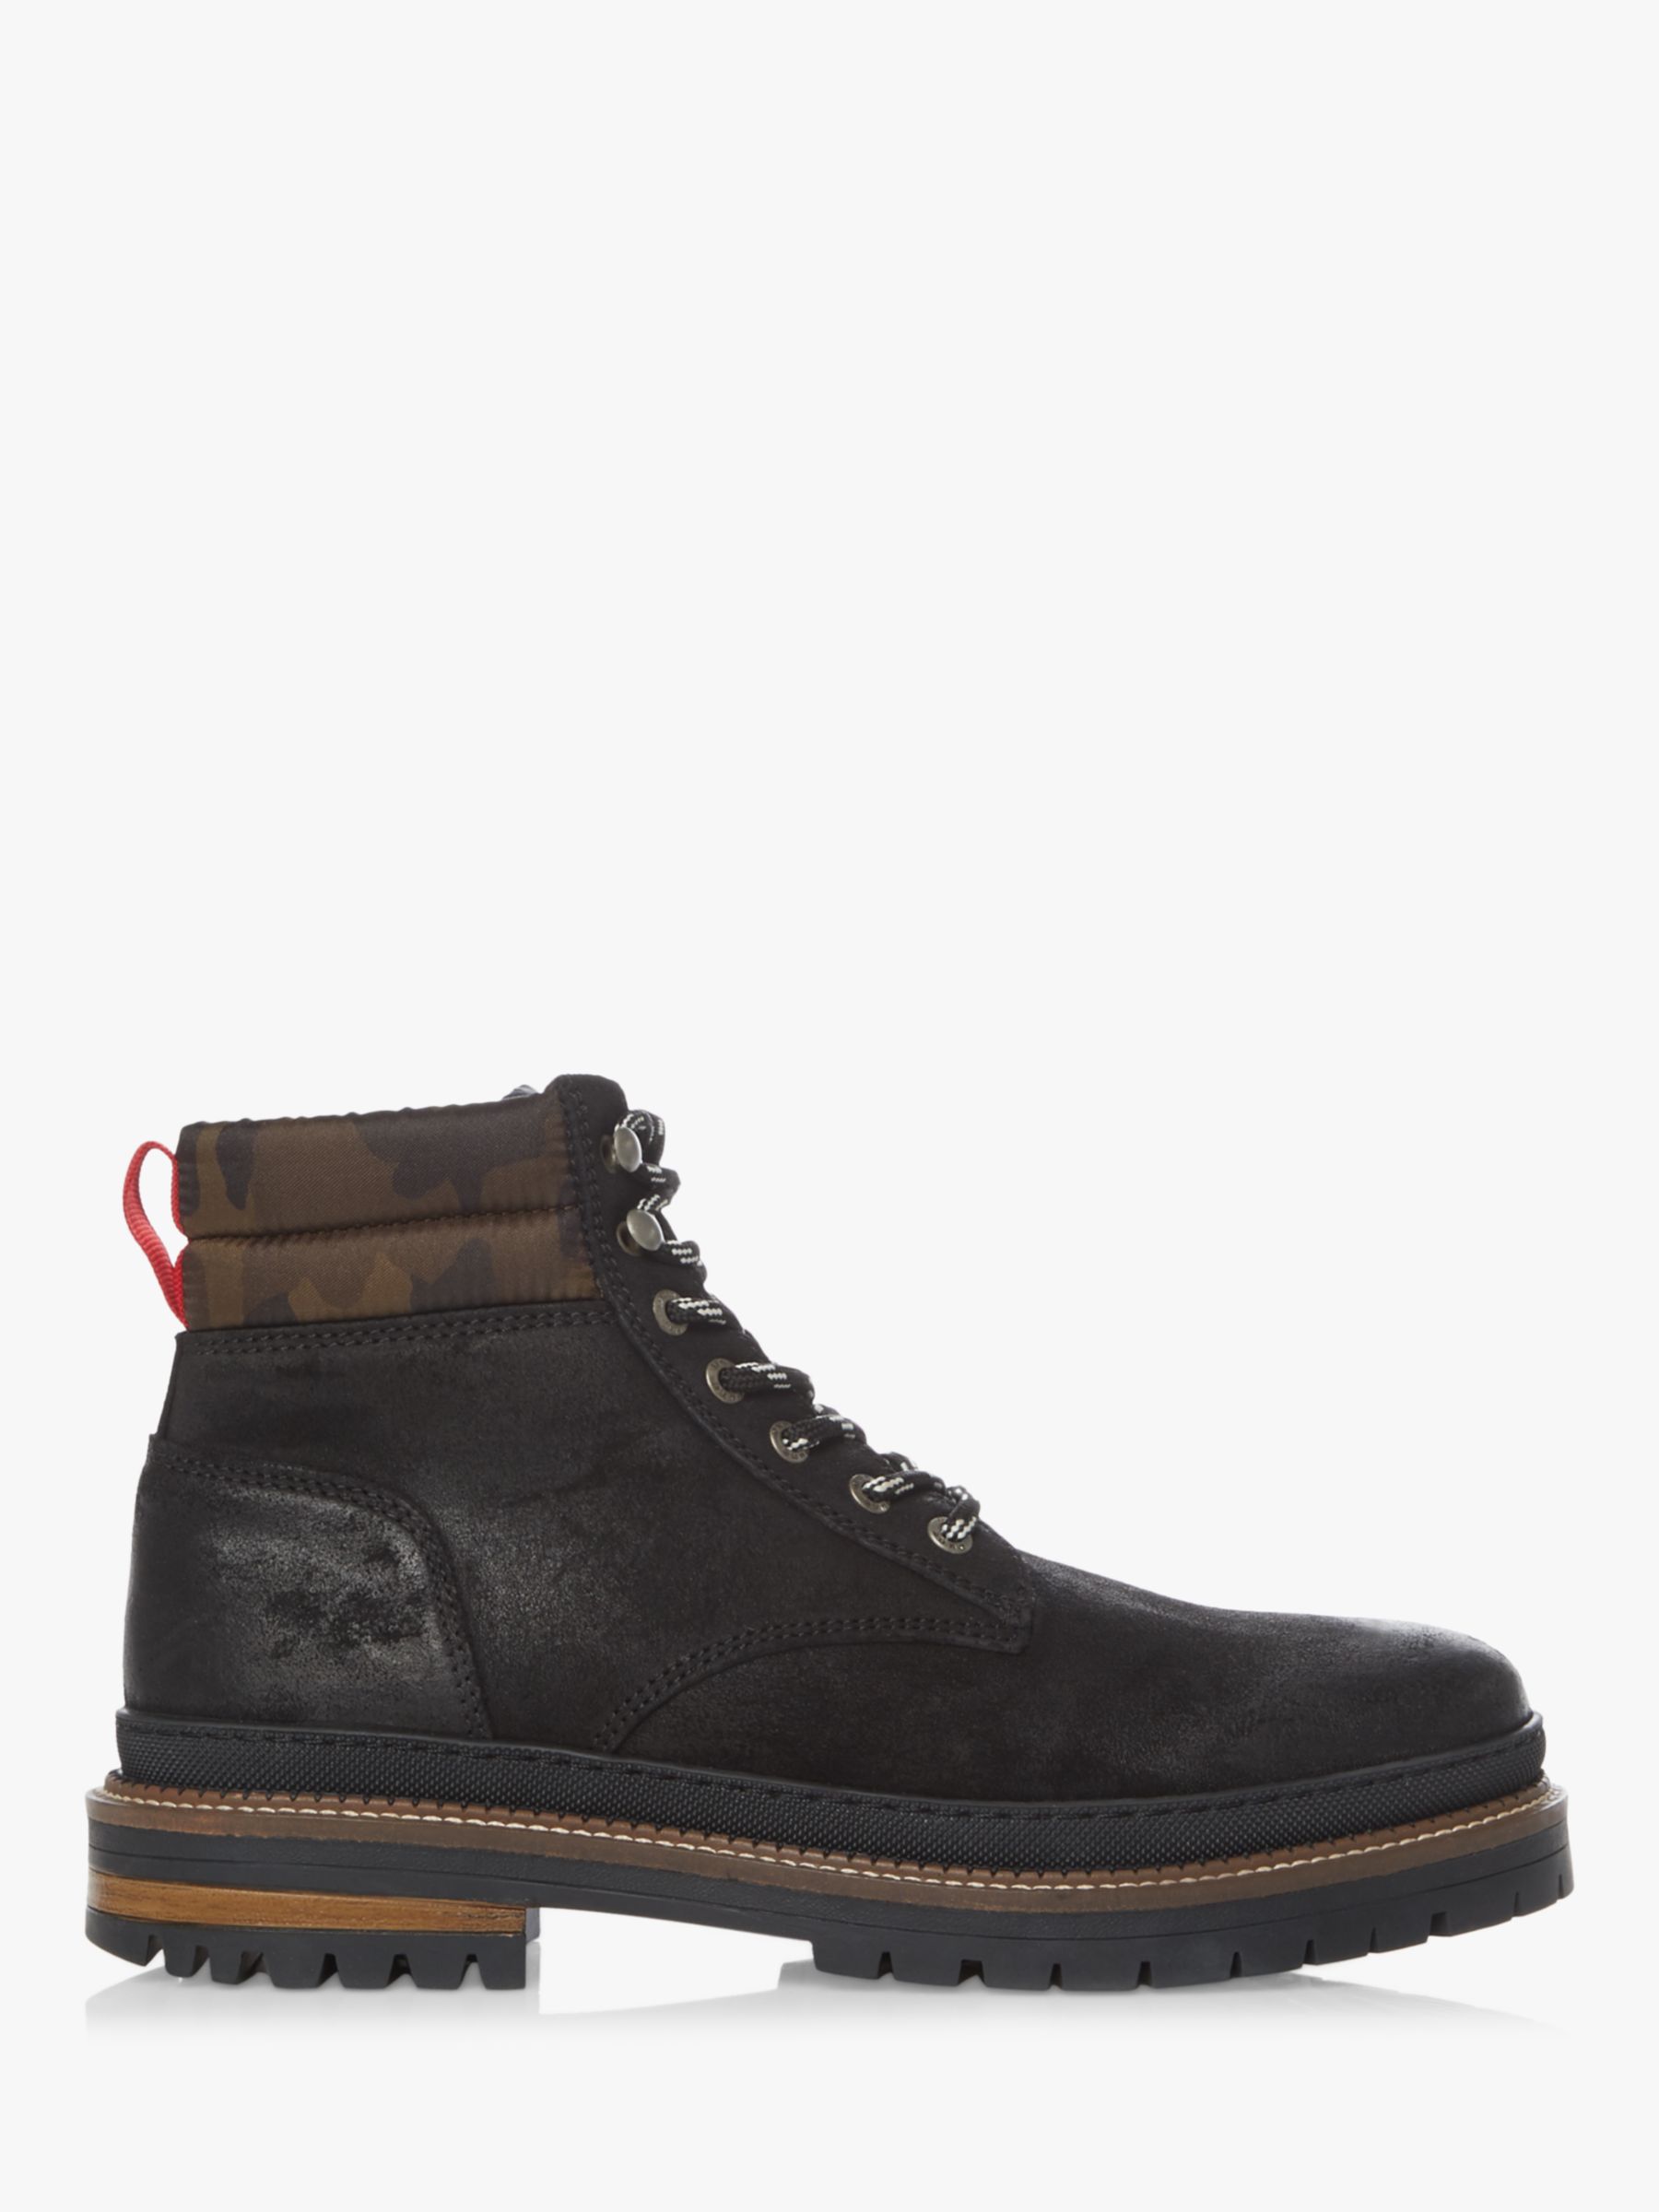 Dune Cordial Suede Chunky Hiker Boots, Black at John Lewis & Partners